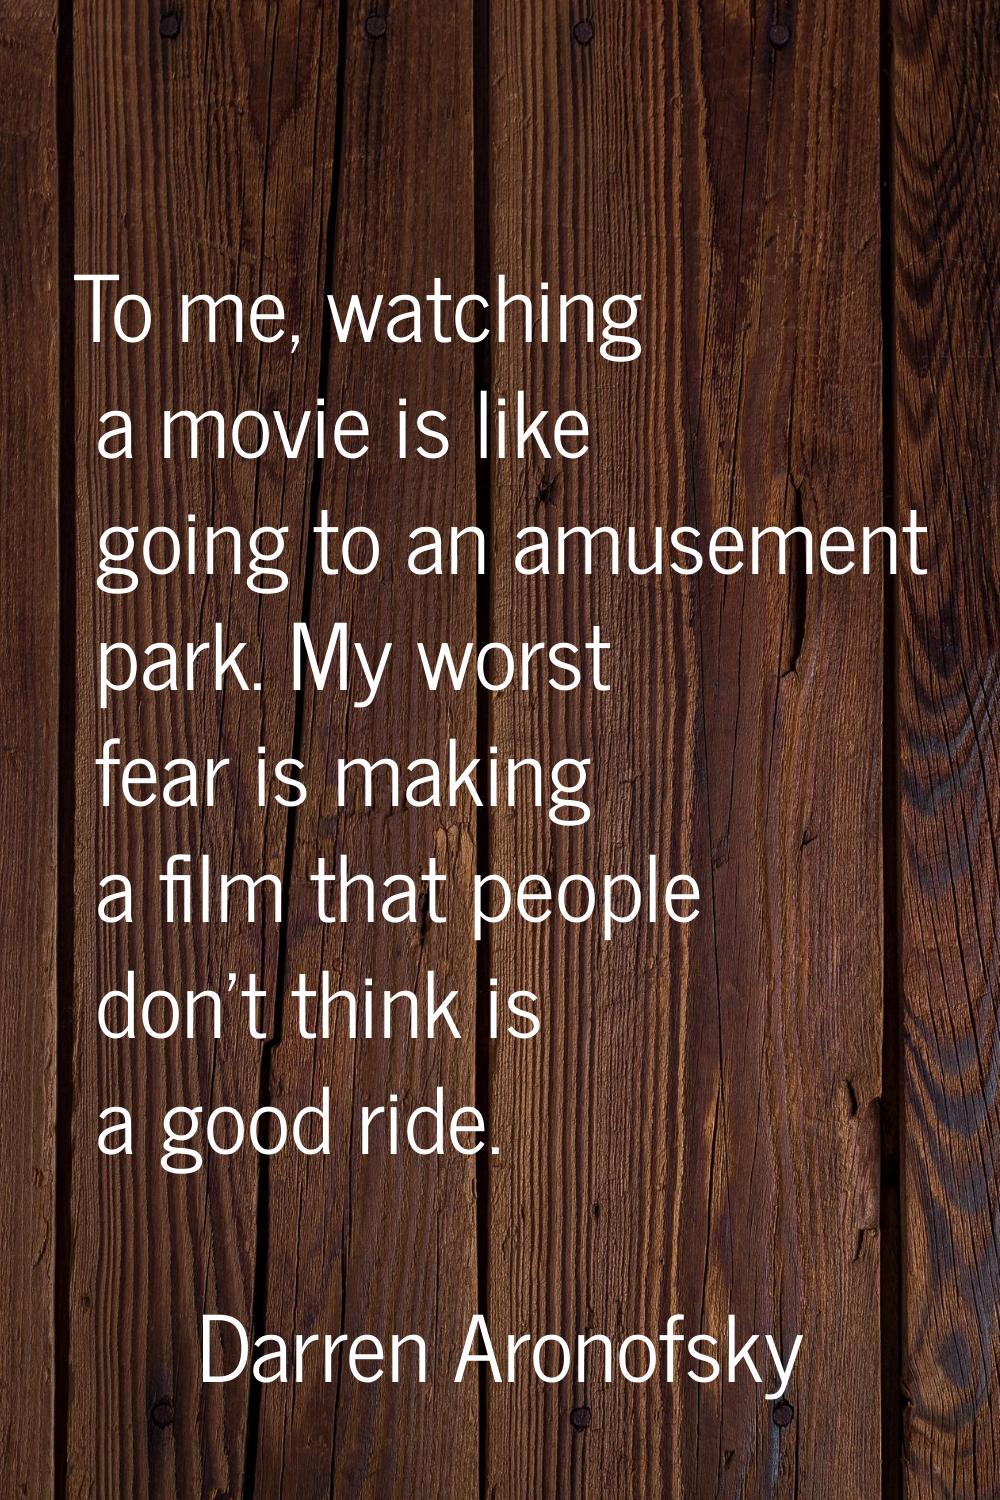 To me, watching a movie is like going to an amusement park. My worst fear is making a film that peo